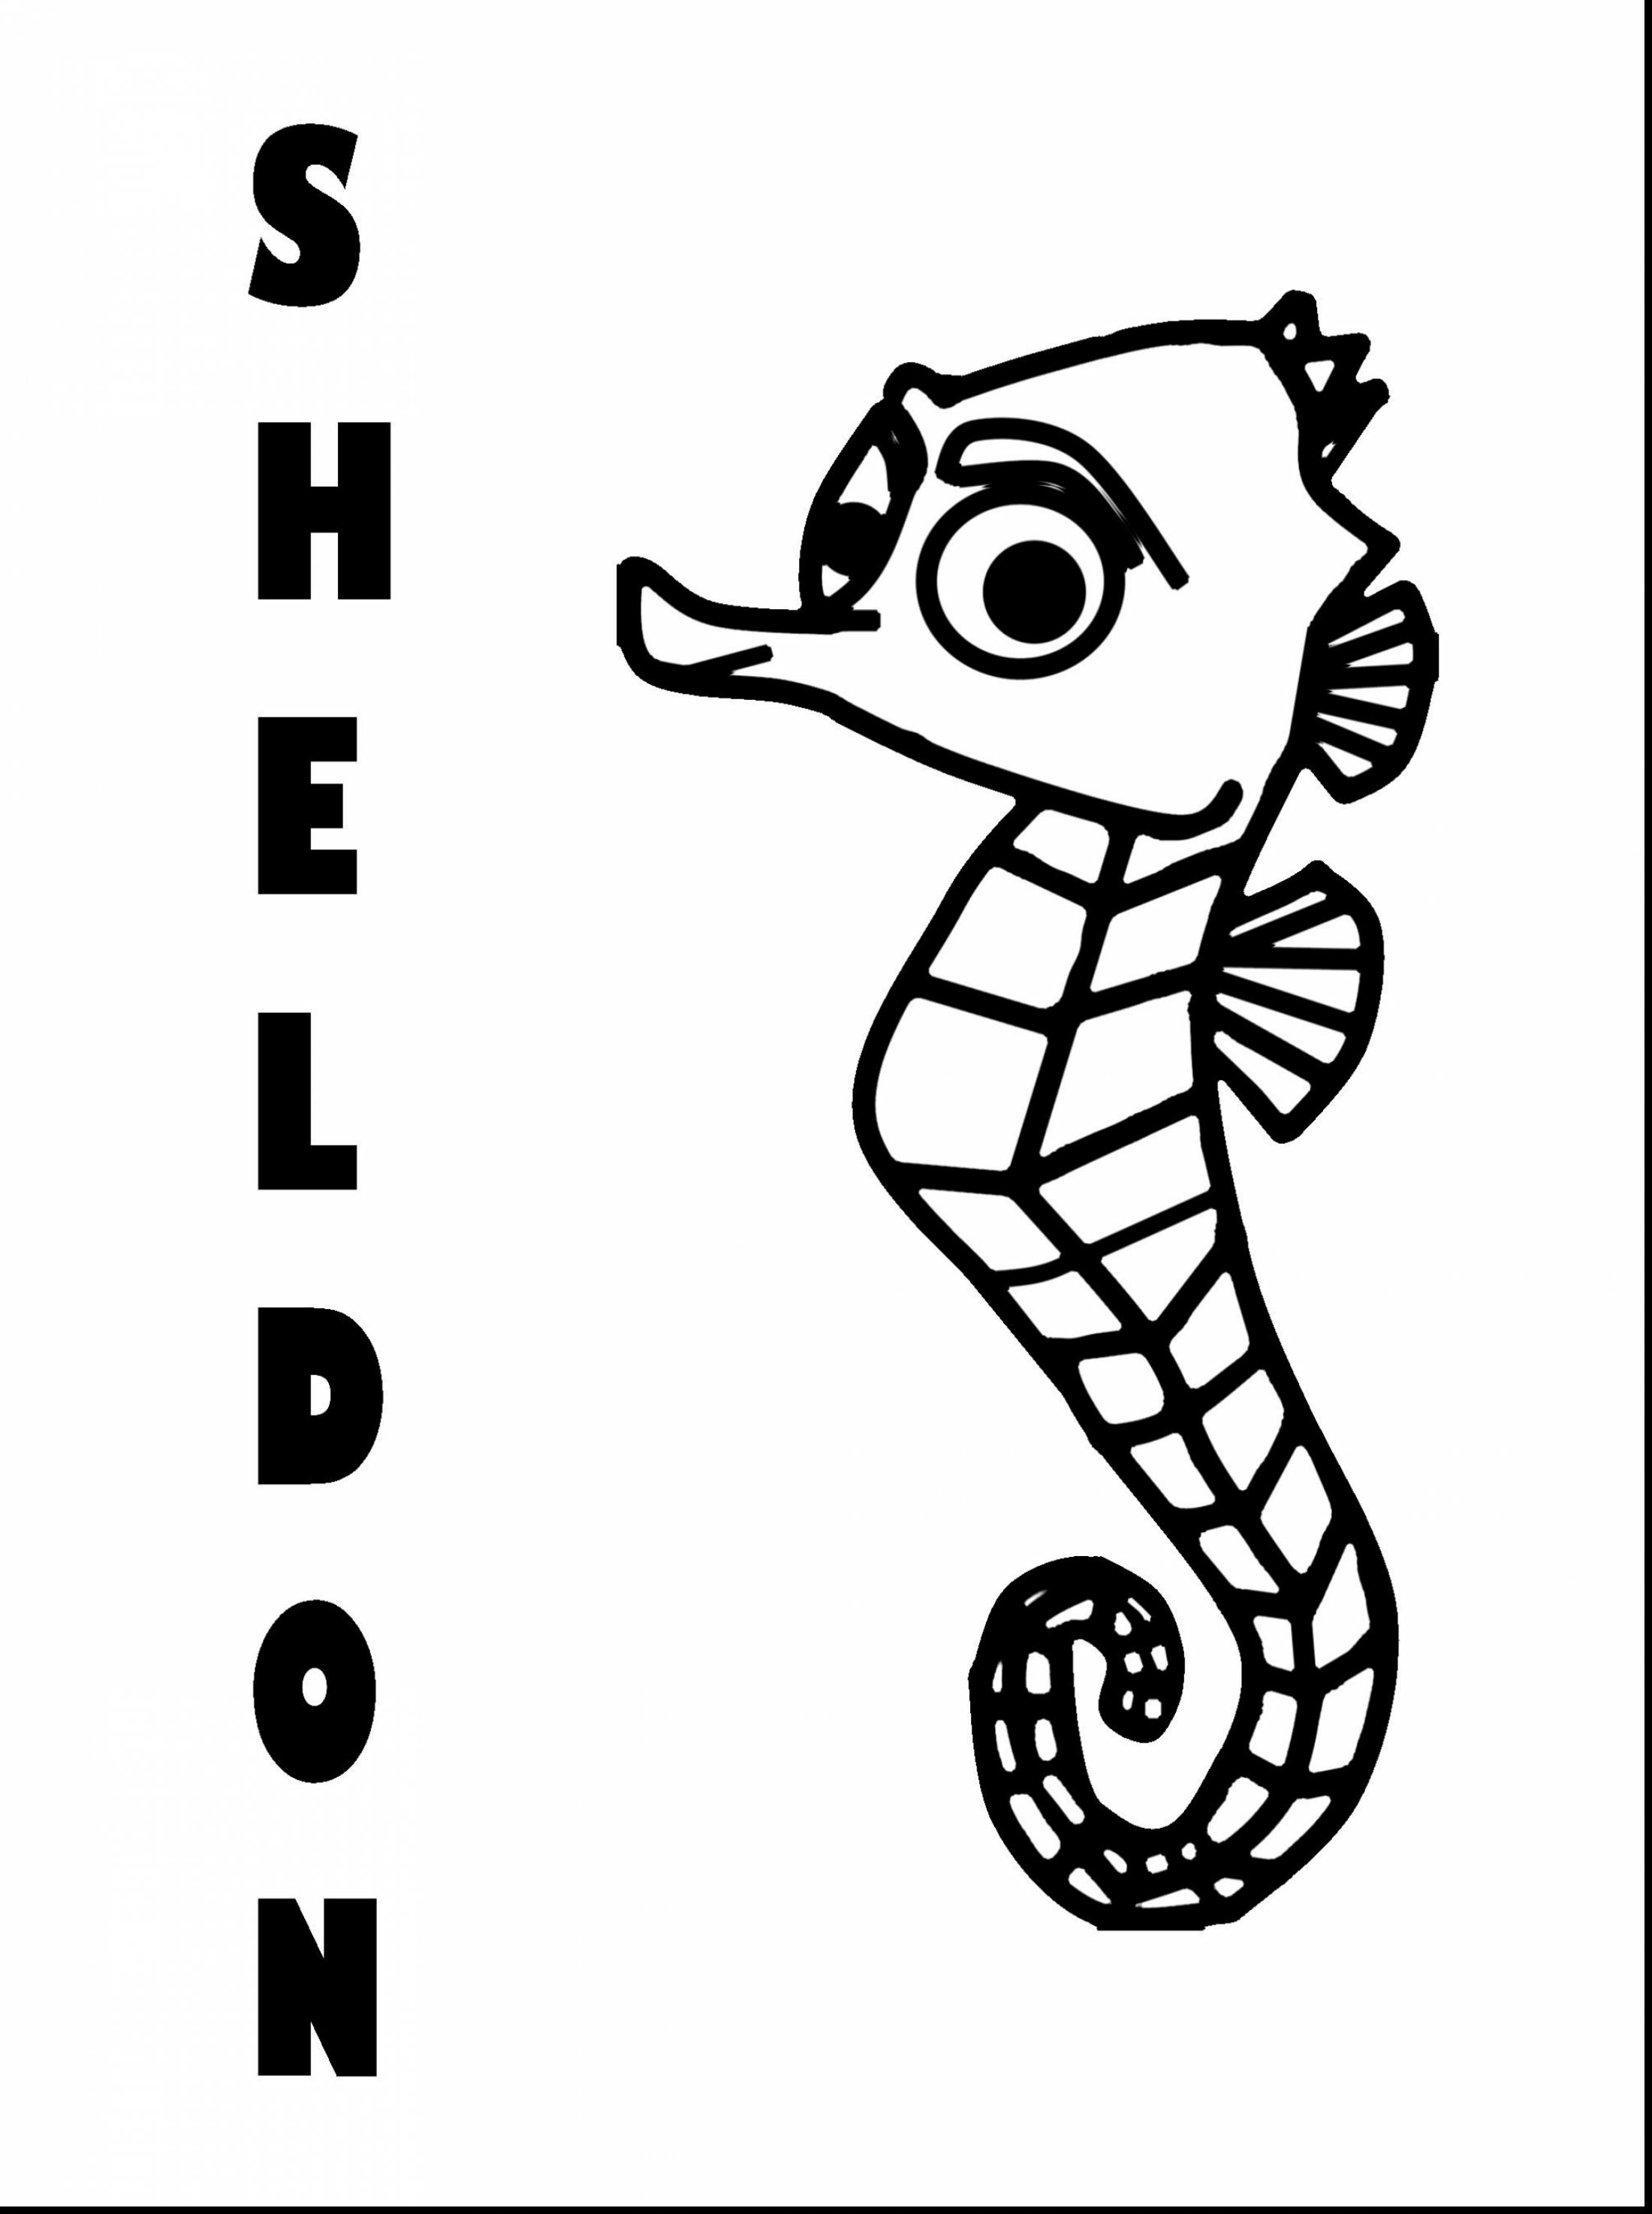 Finding Nemo Characters Coloring Pages Coloring Ideas Nemo Printableloring Pages Picture Inspirations